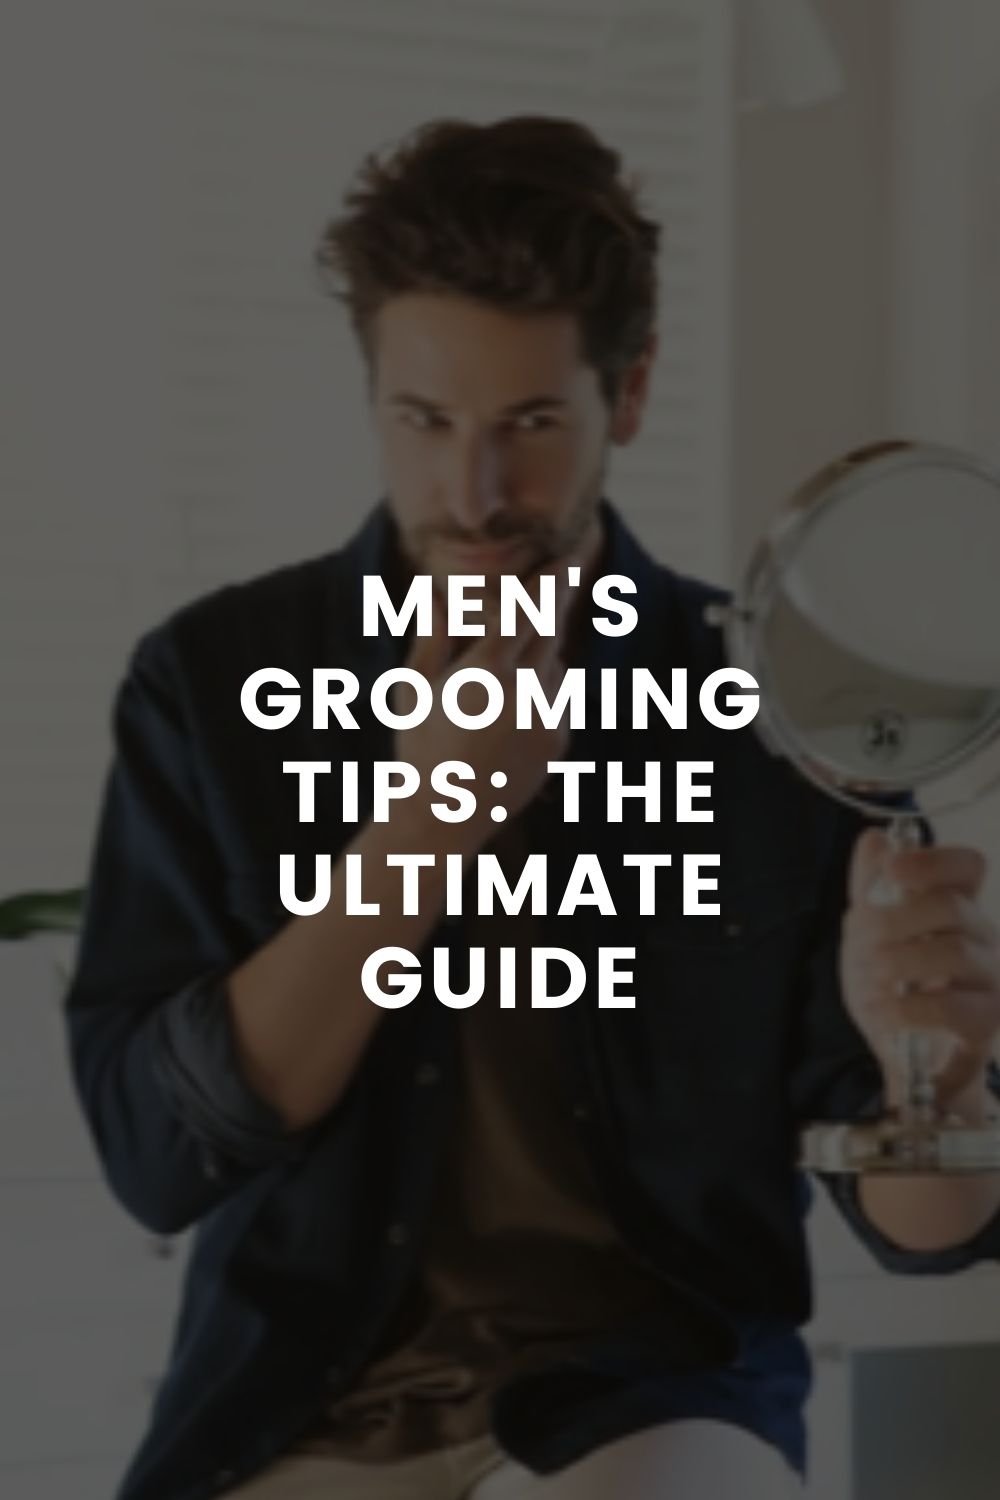 Men's grooming tips: The Ultimate Guide